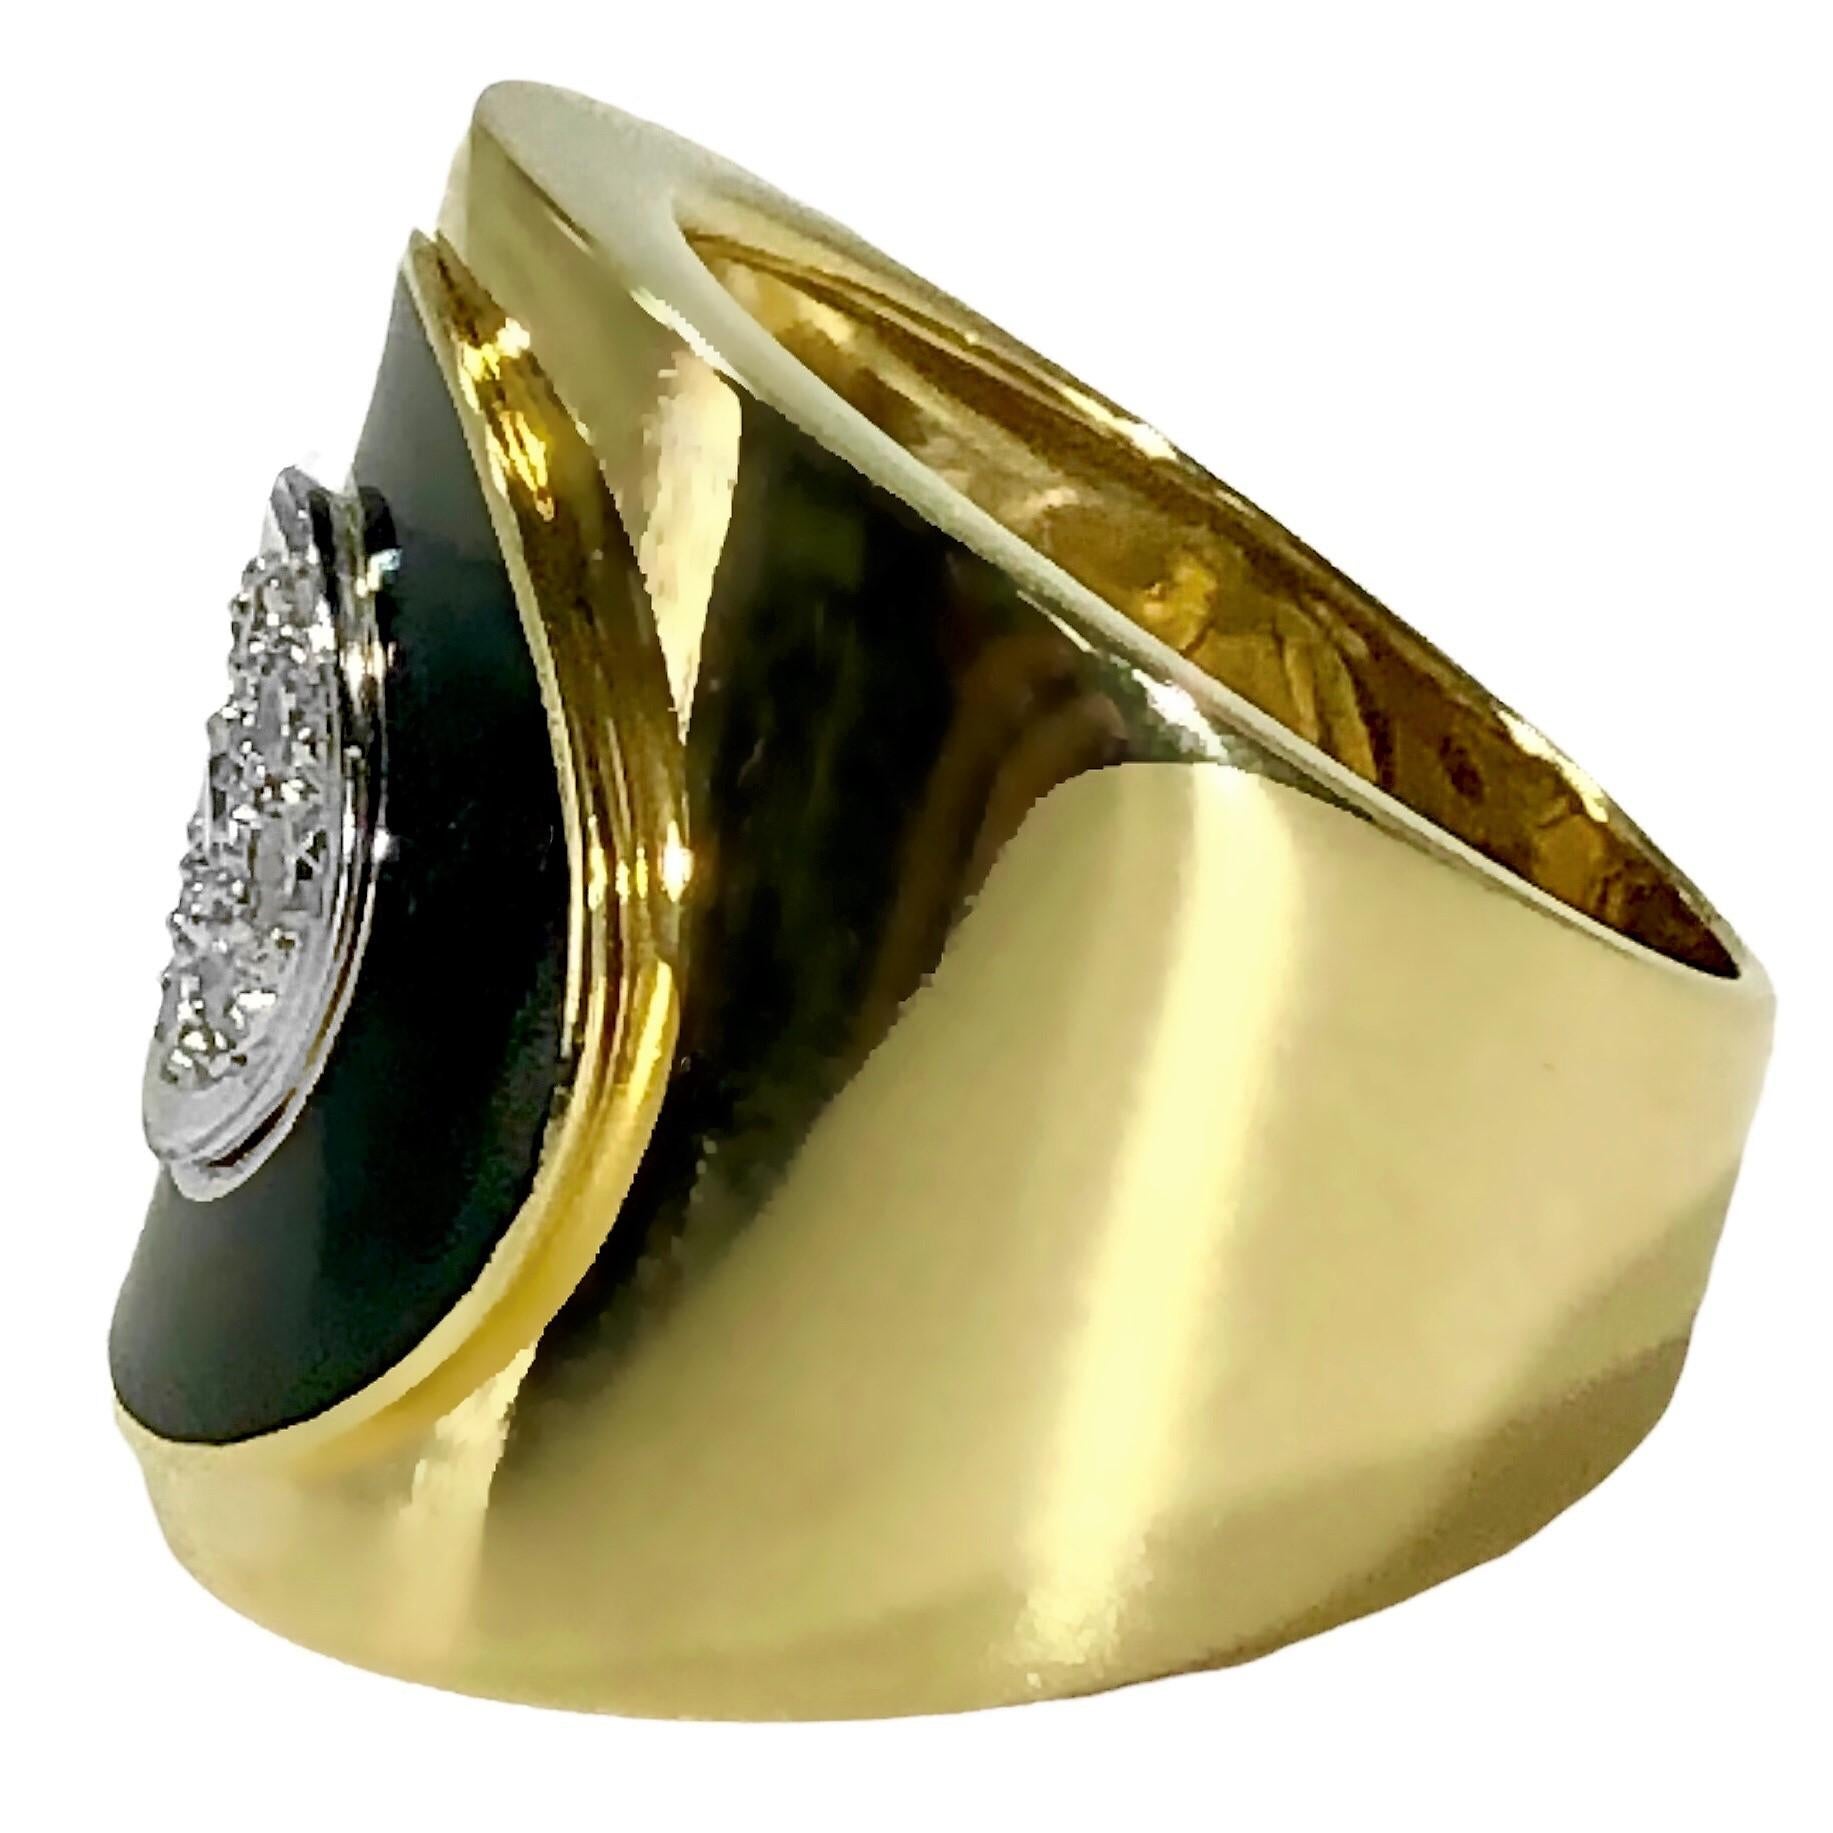 This very stylish 18k yellow gold Italian Cigar Band ring is certain to evoke delight in the wearer as well as any observer. It is wide at the front, measuring 7/8 inches and tapers down to a very comfortable 3/16 inches at the rear. At the center